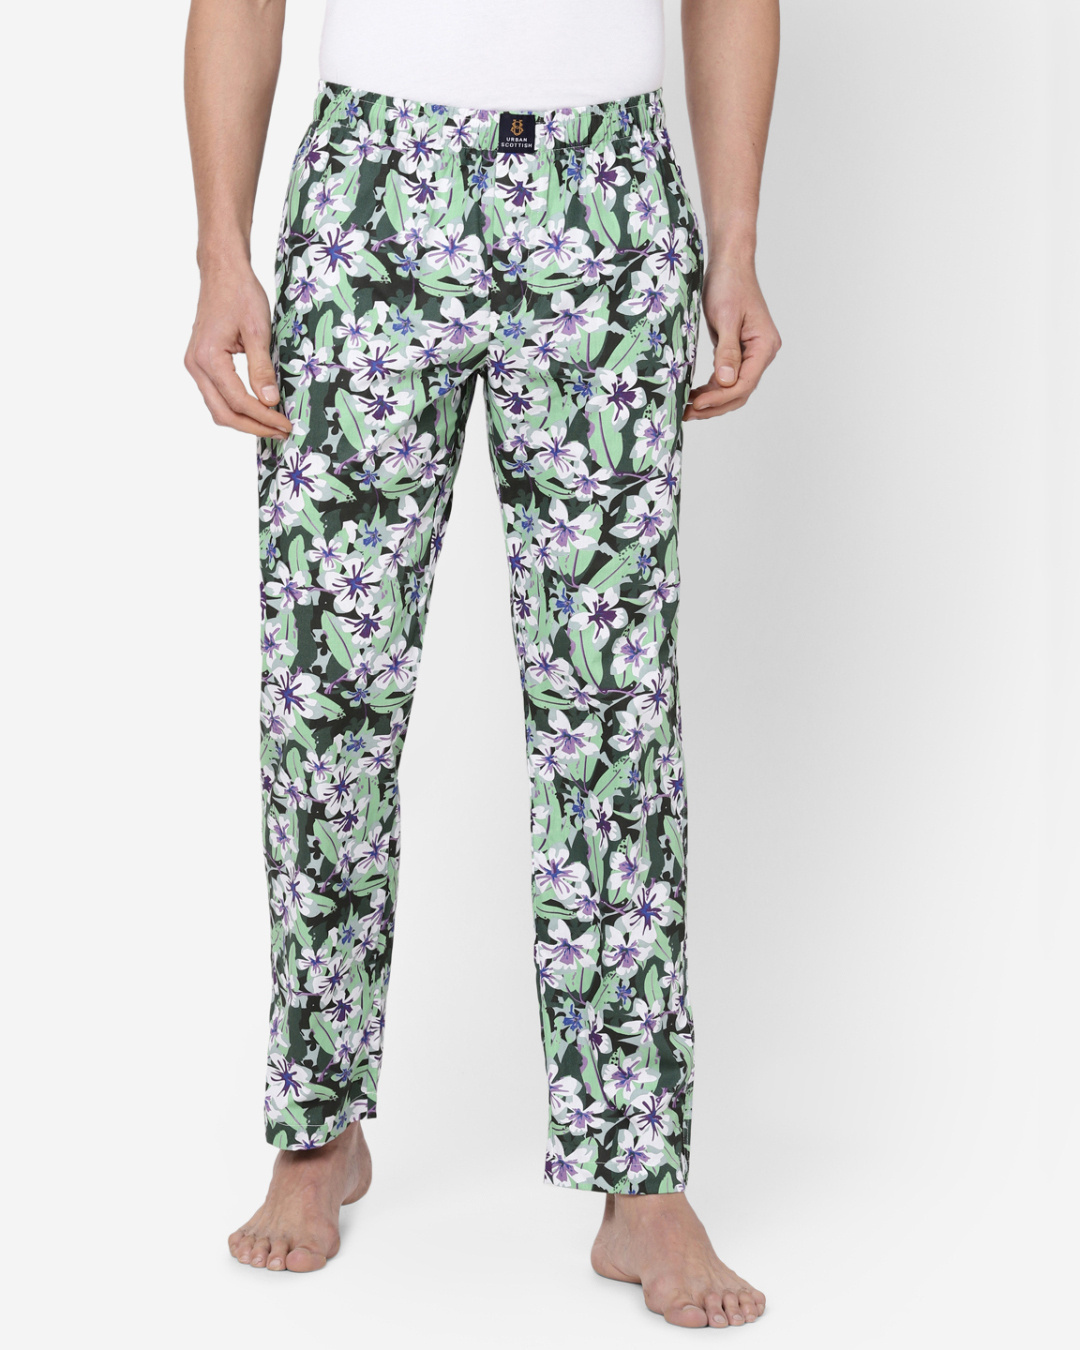 Buy Men's Green All Over Floral Printed Lounge Pants Online in India at ...